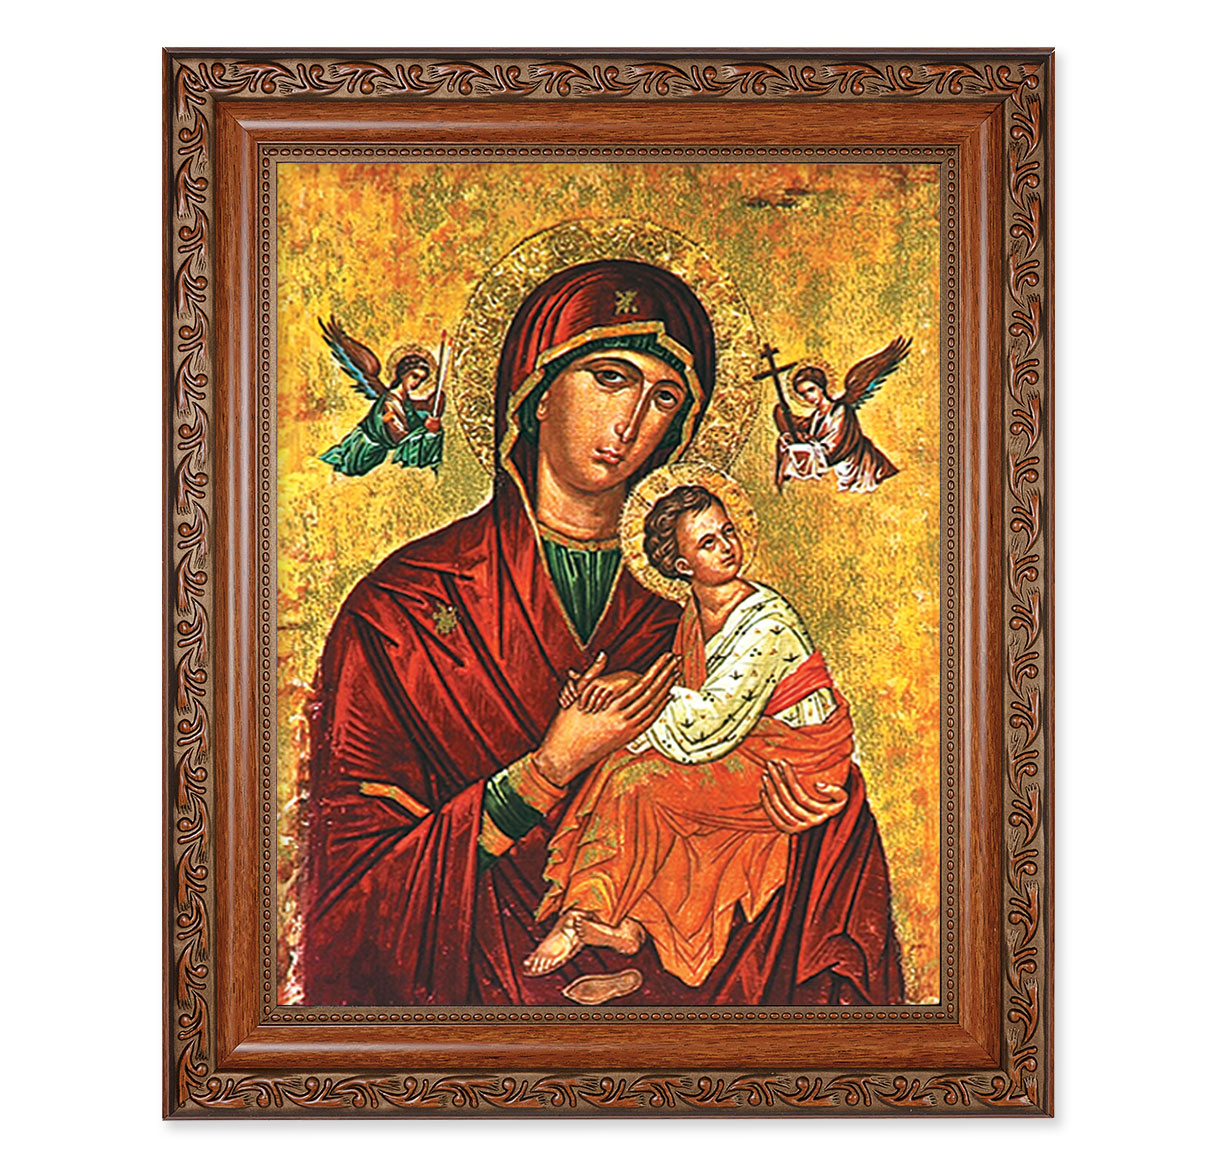 Our Lady of Passion Mahogany Finished Framed Art